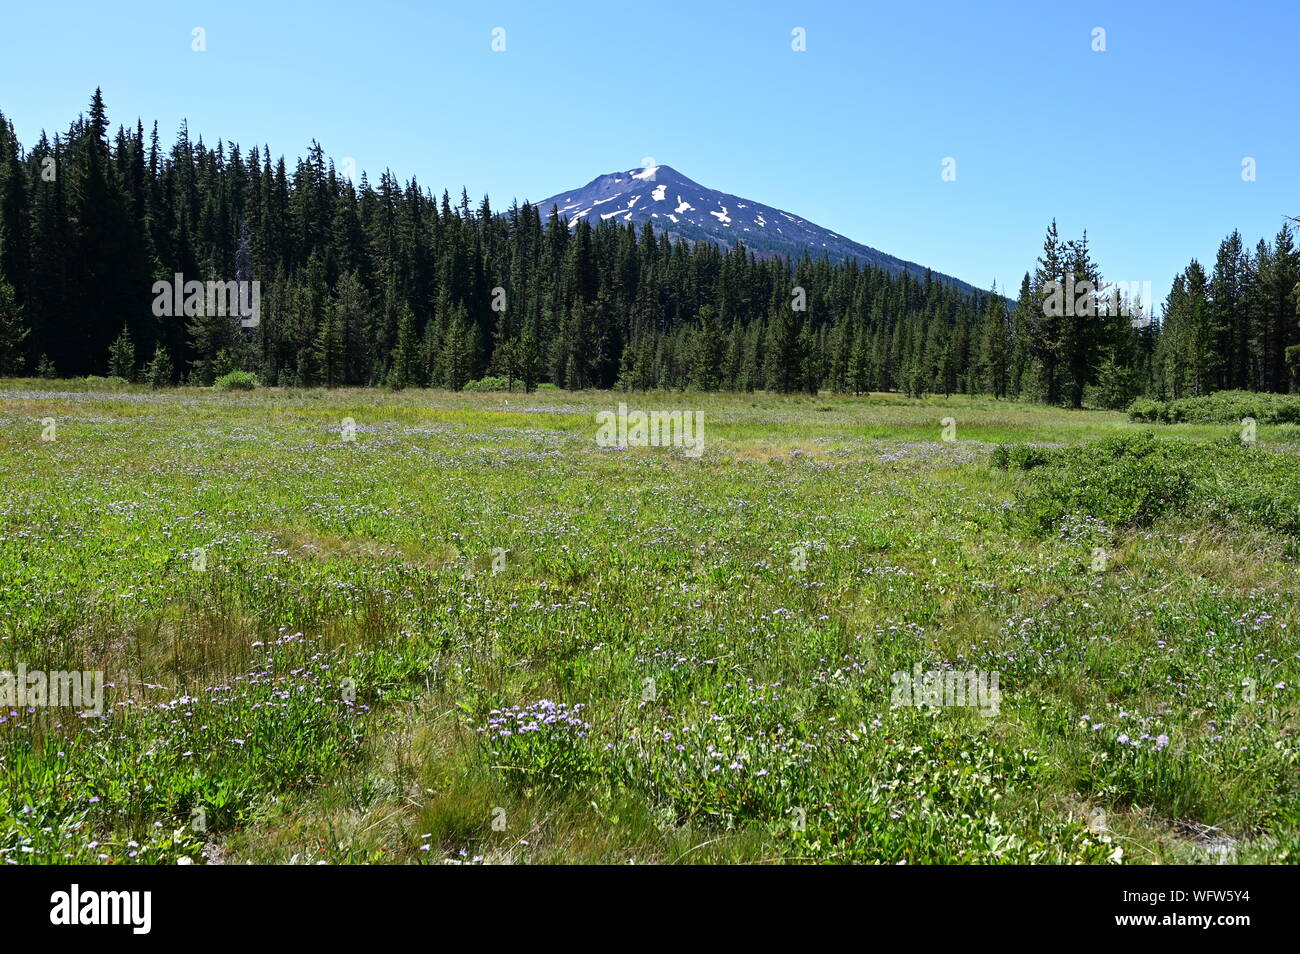 Field of Mountain Daisy - Erigeron peregrinus - with Mount Bachelor in background on clear sunny summer day. Stock Photo